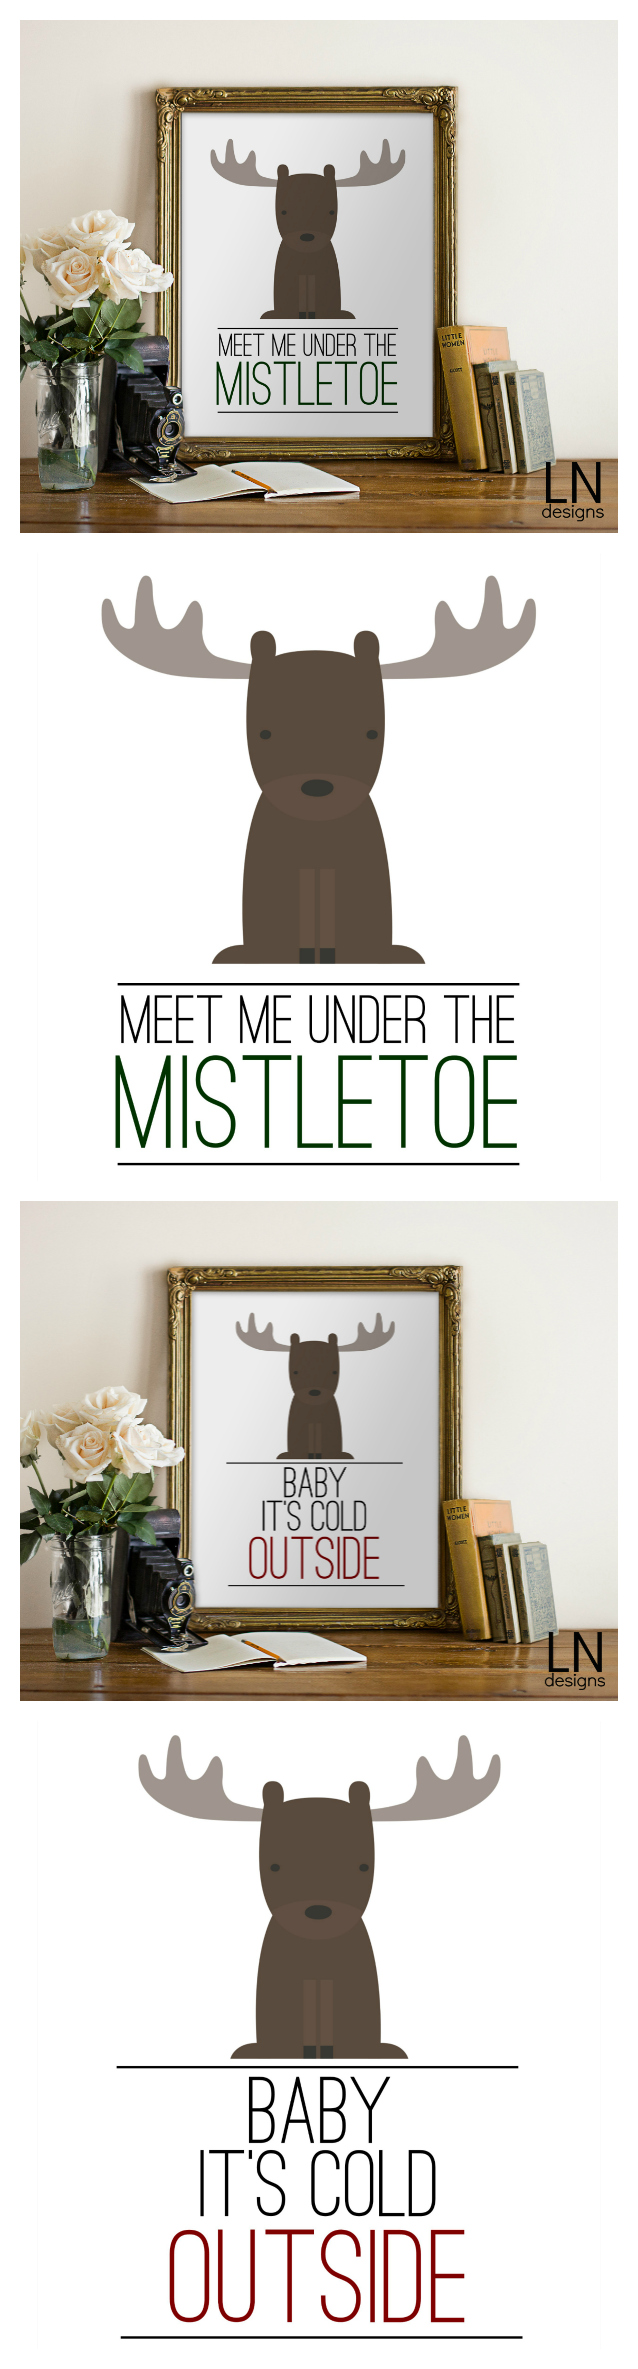 Free Winter and Christmas Themed Printables. Meet Me Under the Mistletoe and Baby Its Cold Outside. So cute!